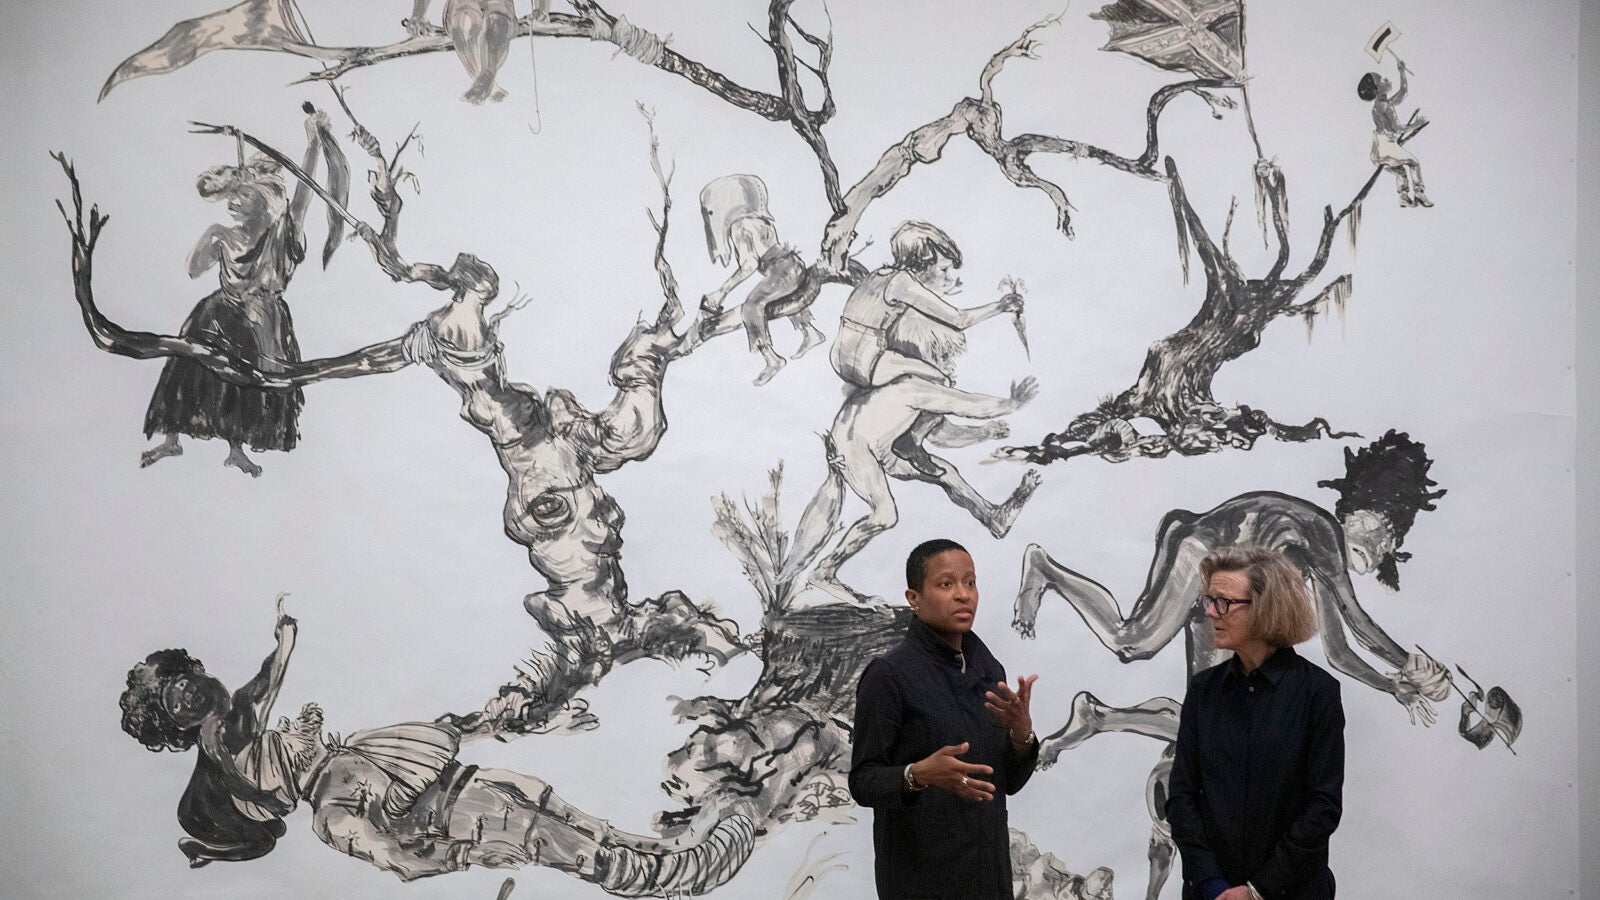 Chassidy Winestock and Mary Schneider Enriquez with Kara Walker's art U.S.A Idioms..